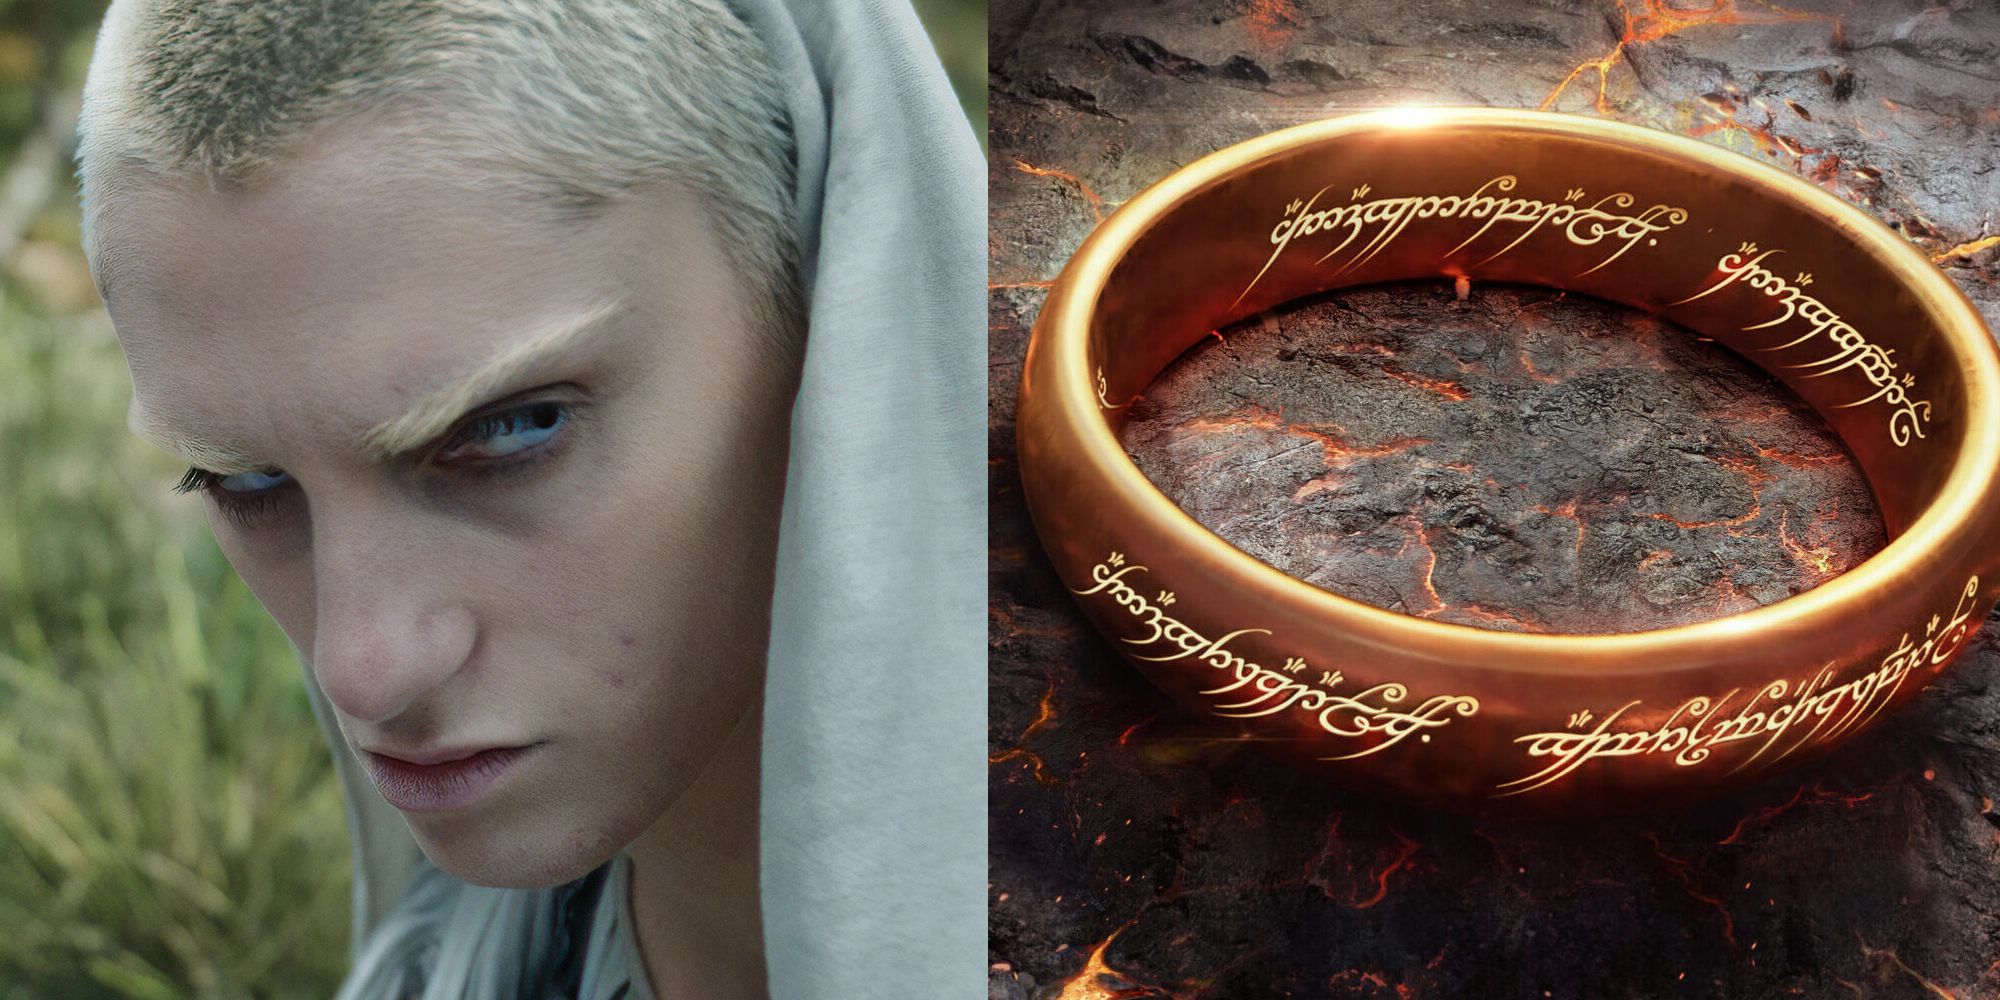 Rings of Power Split Image: Young boy (sauron) glaring; the One Ring